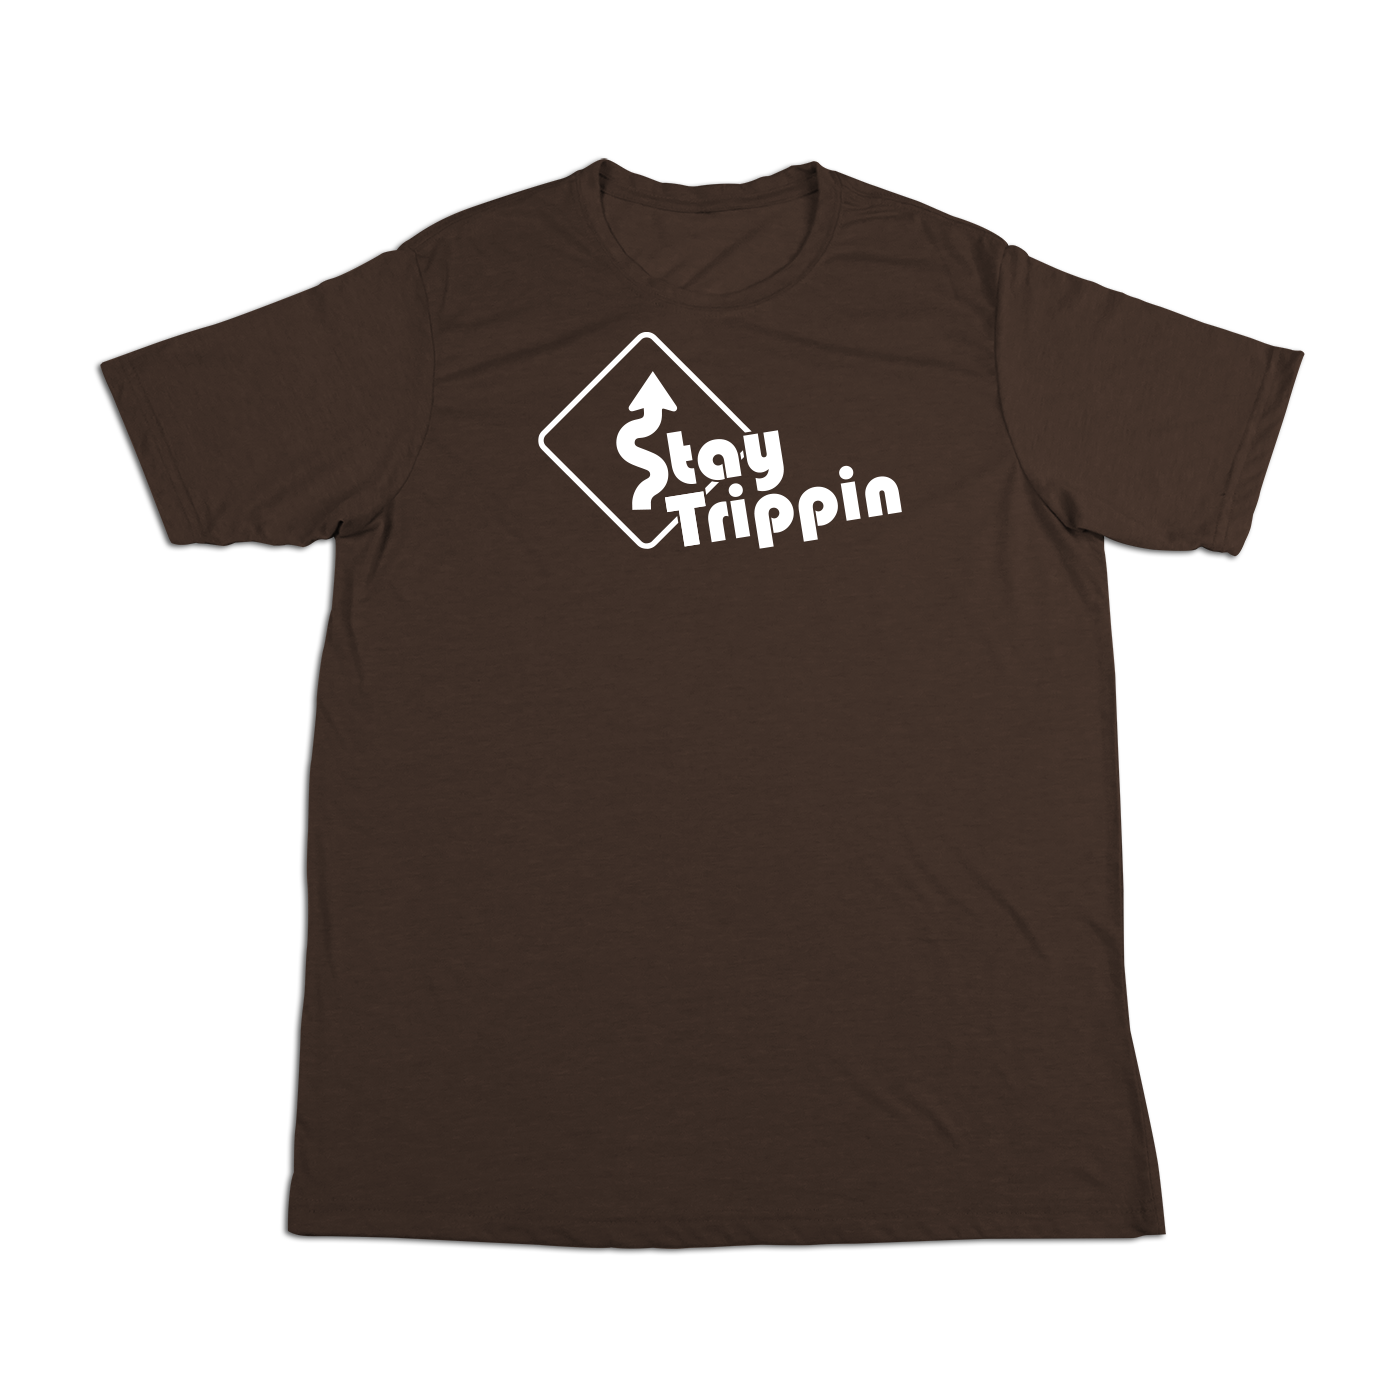 #STAYTRIPPIN Sign Soft Short Sleeve Shirt - Hat Mount for GoPro